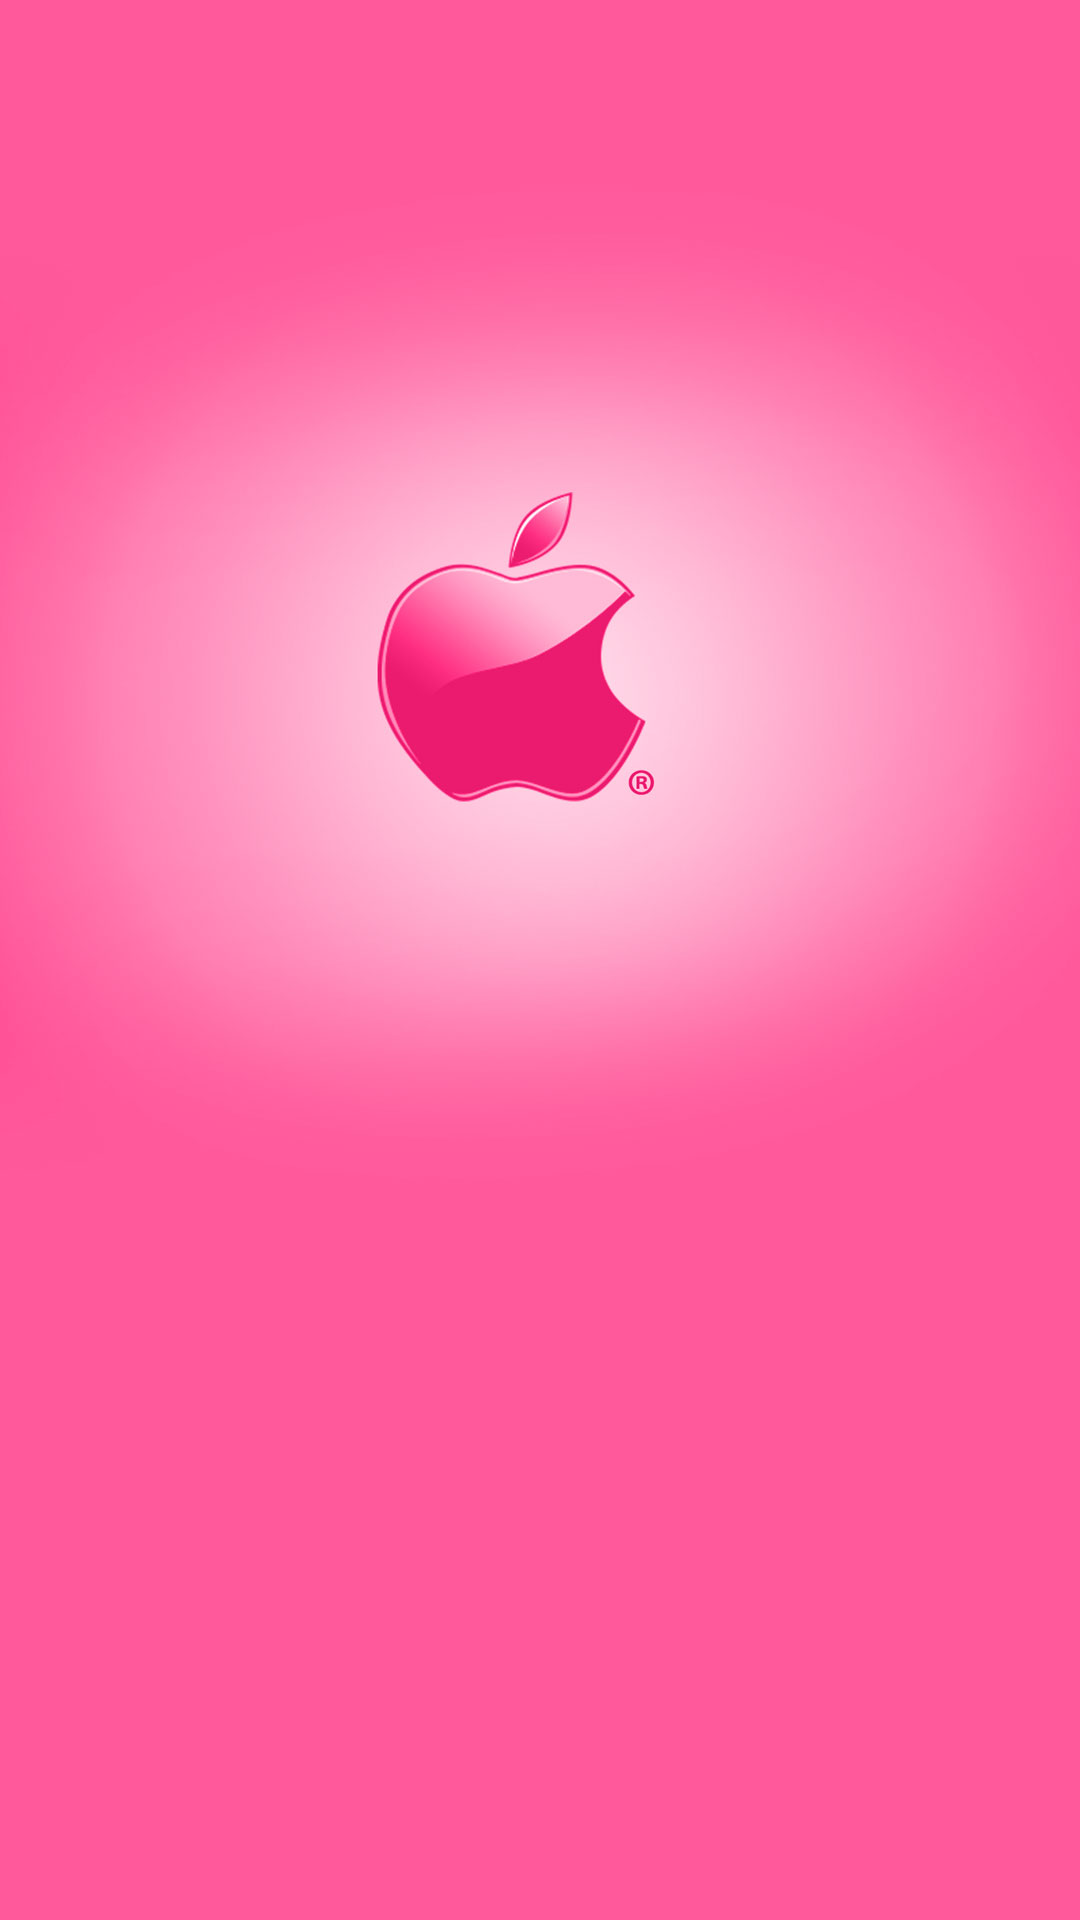 hd wallpapers for iphone 7,pink,red,heart,magenta,sky